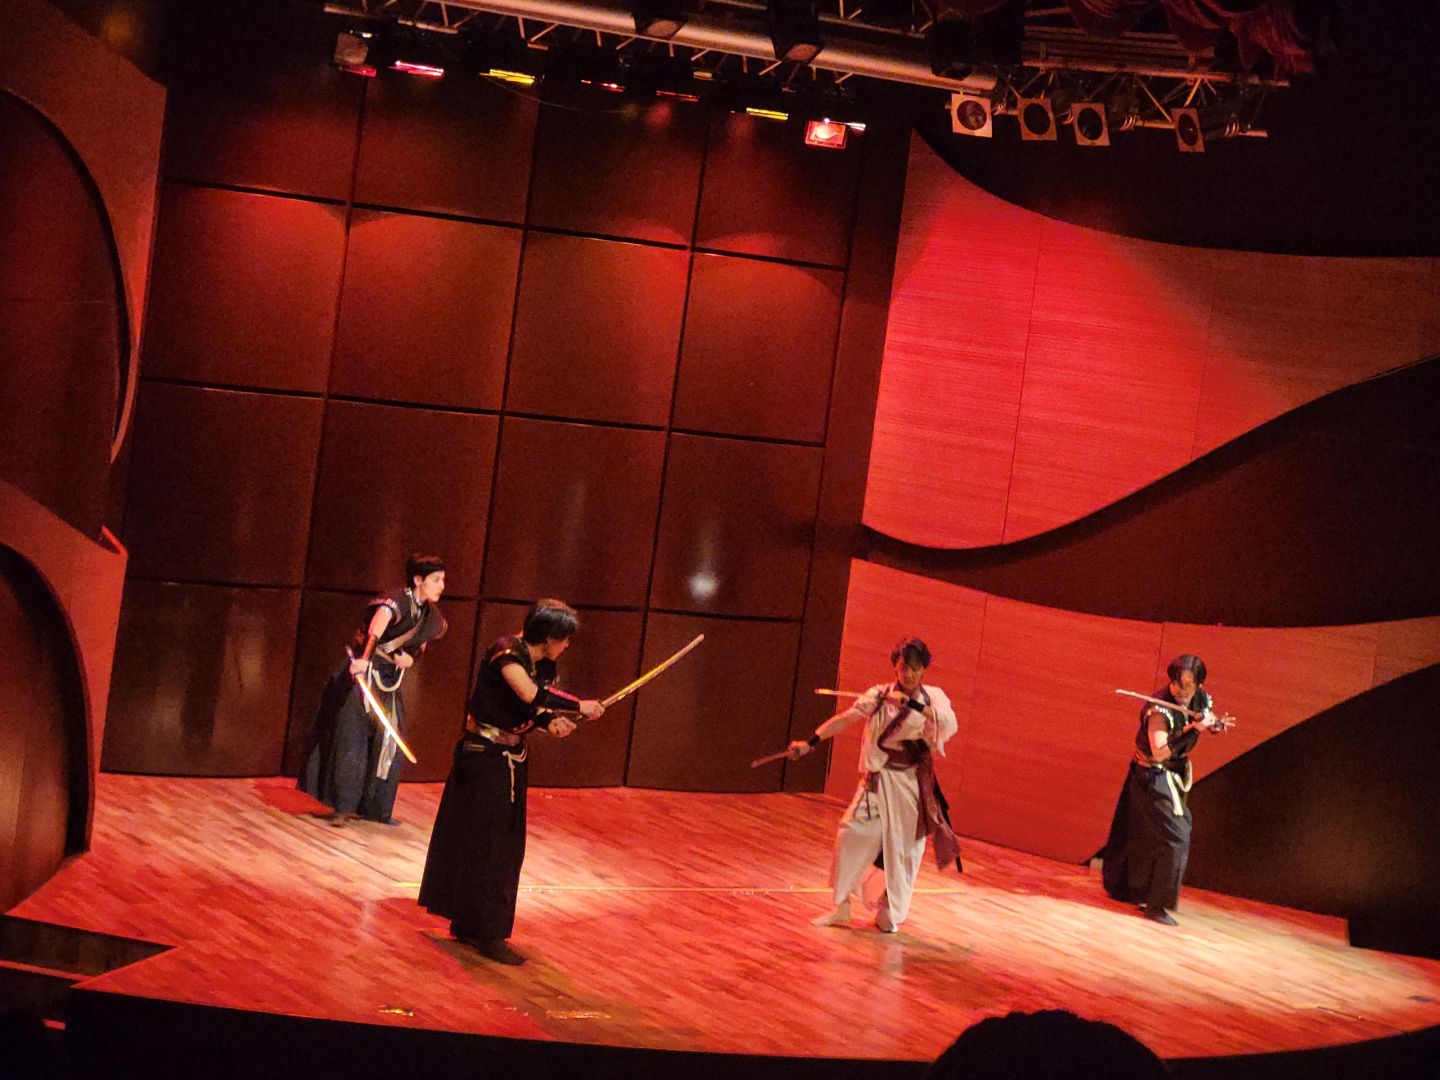 TATE Hatoryu NY enthrals audience with Japan's traditional performing arts [PHOTOS]